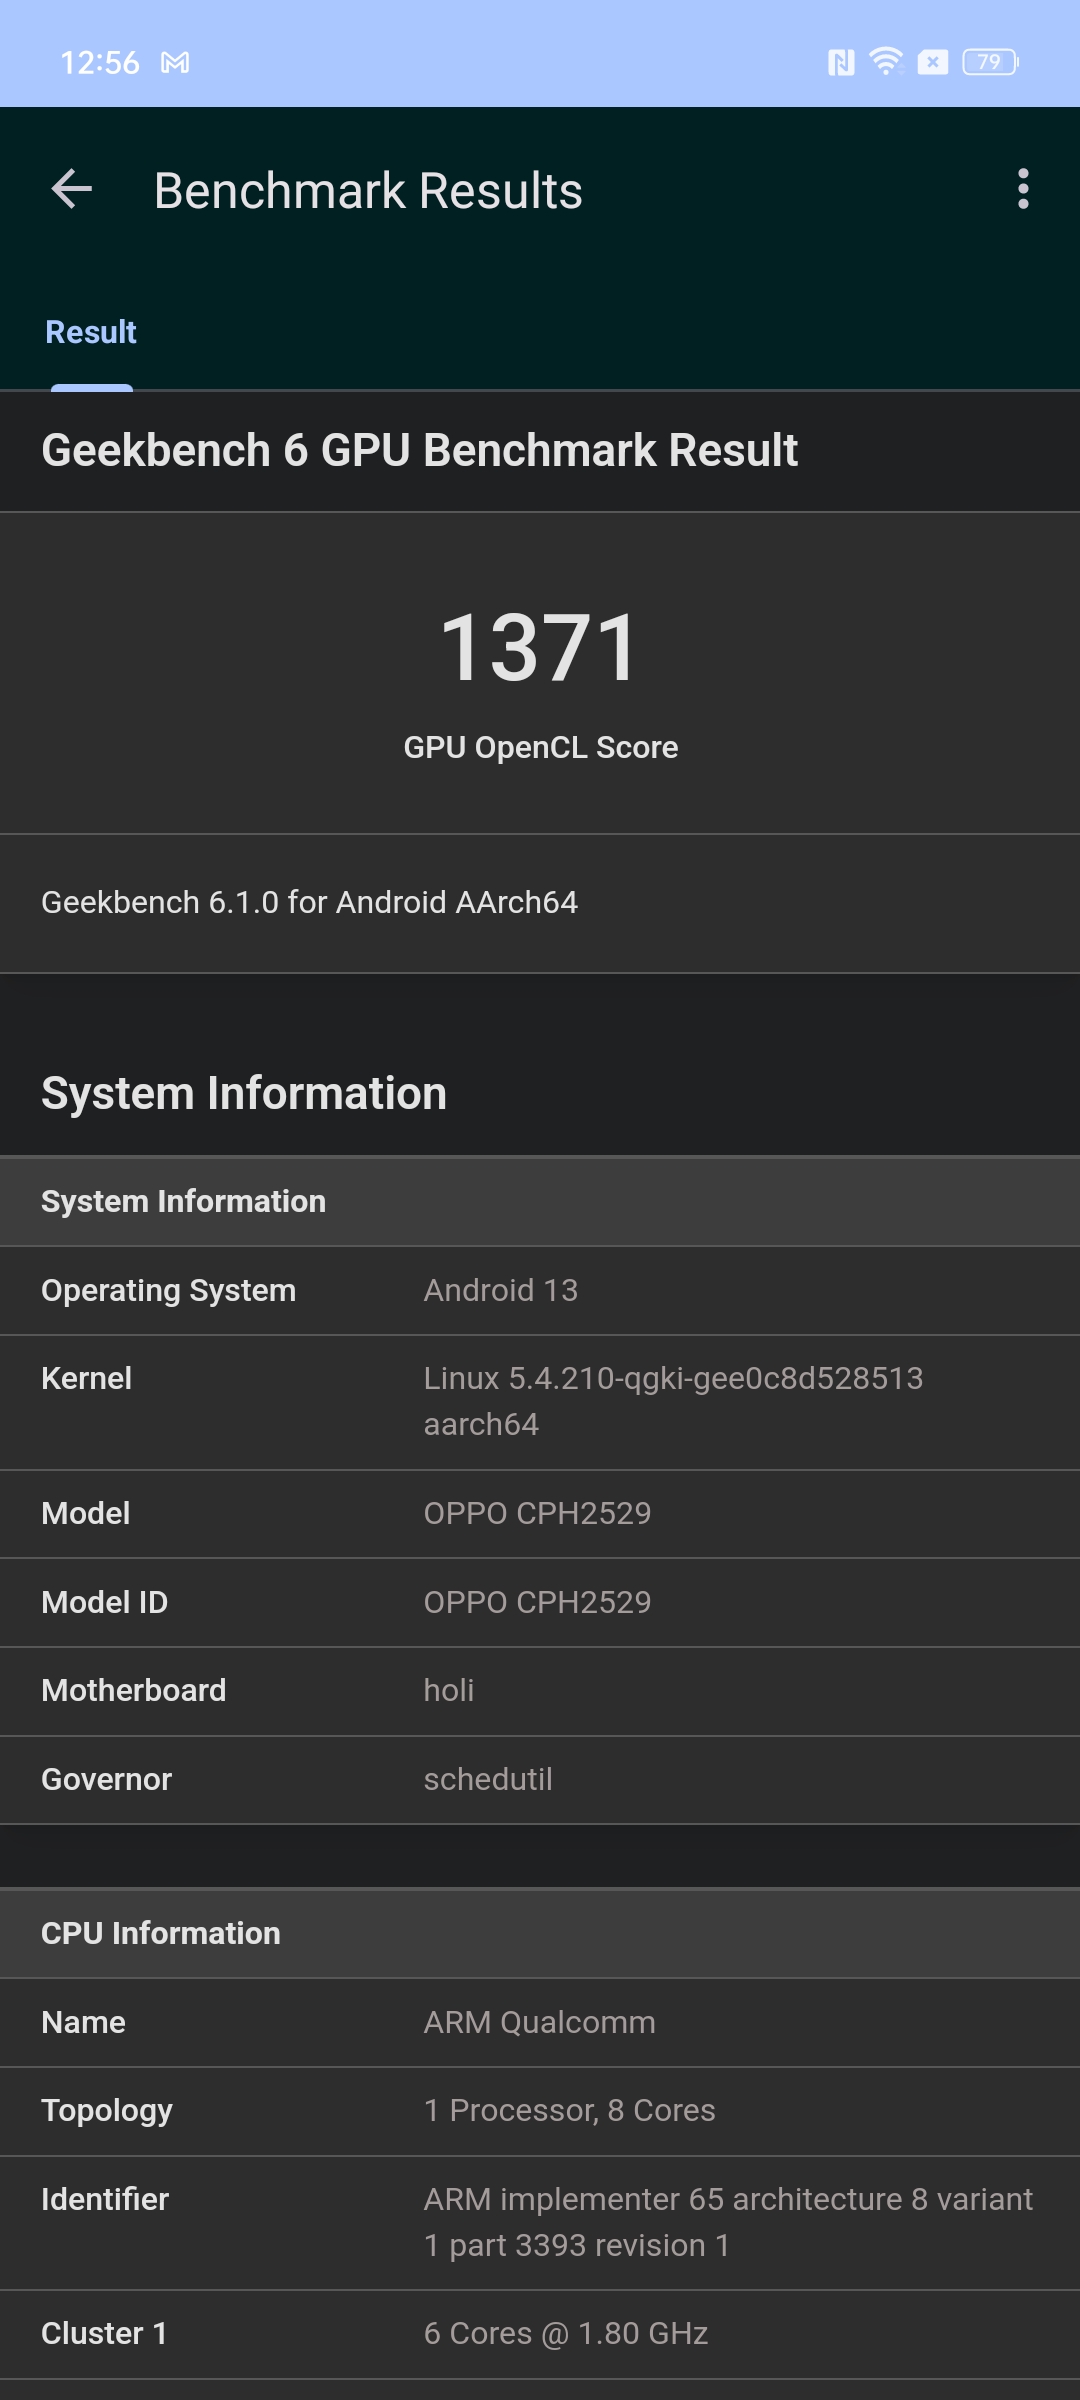 Oppo A98 (PGW110) appears in early Geekbench tests